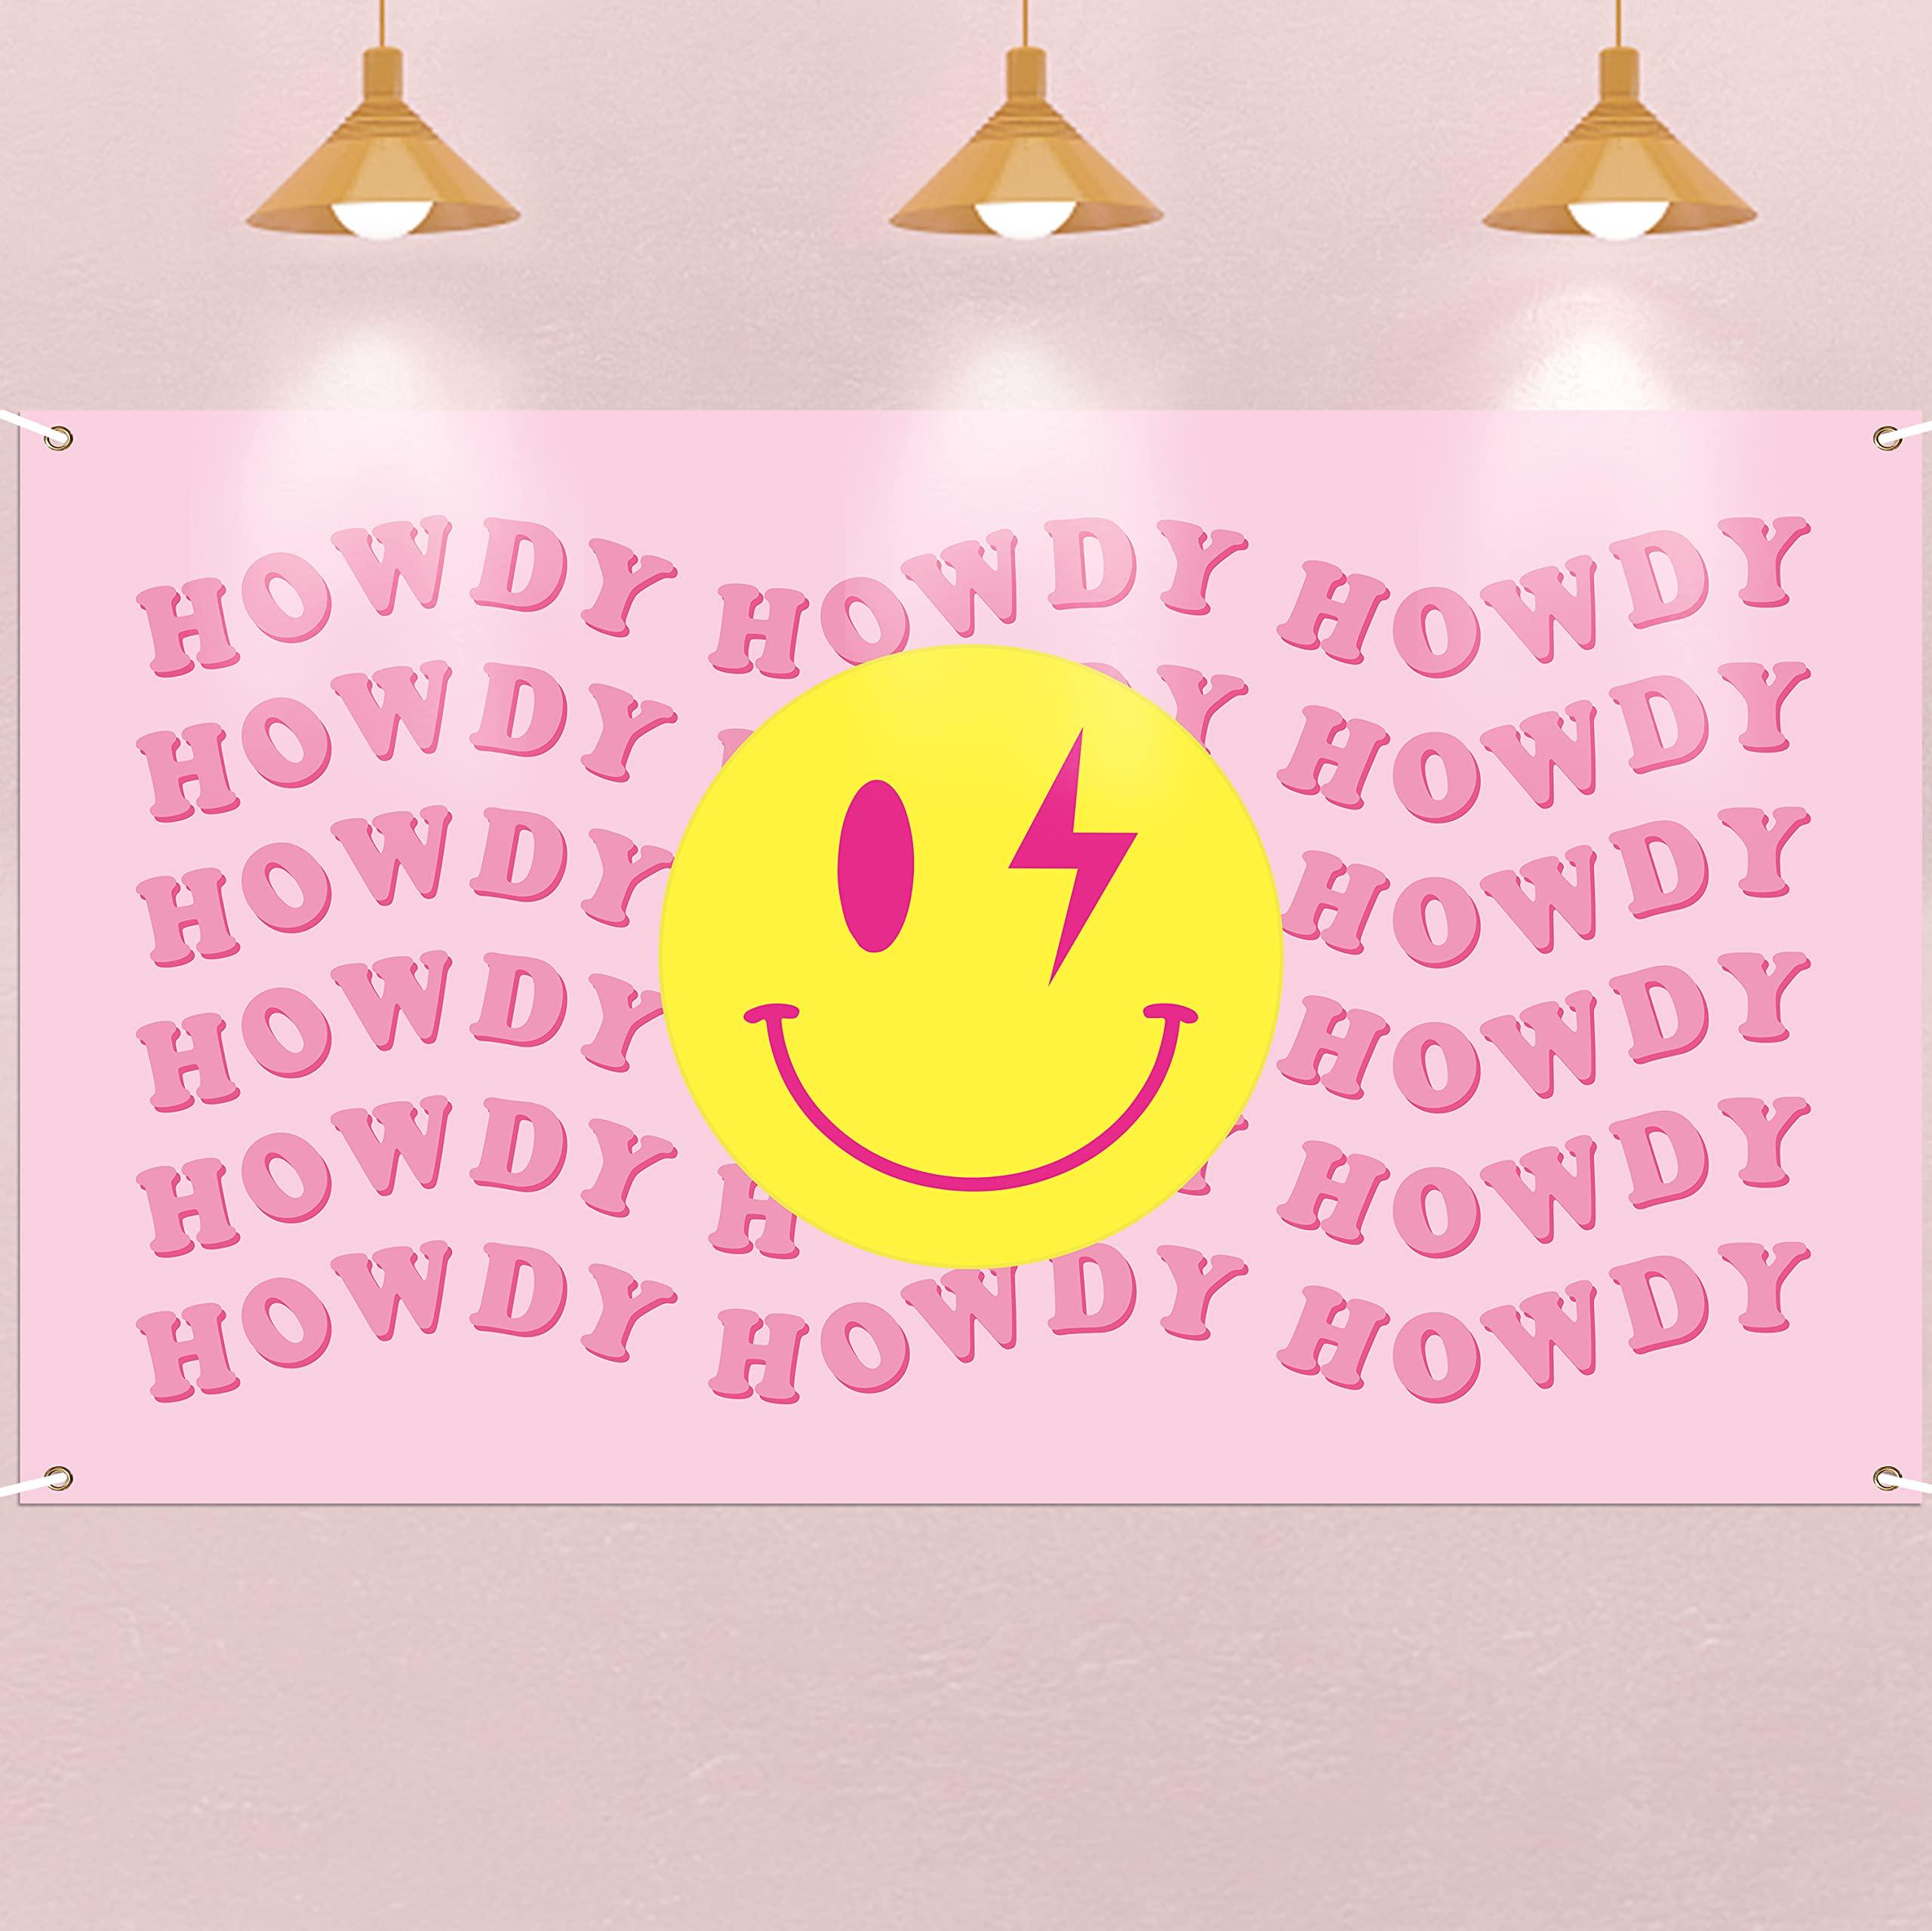 Y1tvei Preppy Cowgirl Room Decor Party Banner Aesthetic Pink Howdy